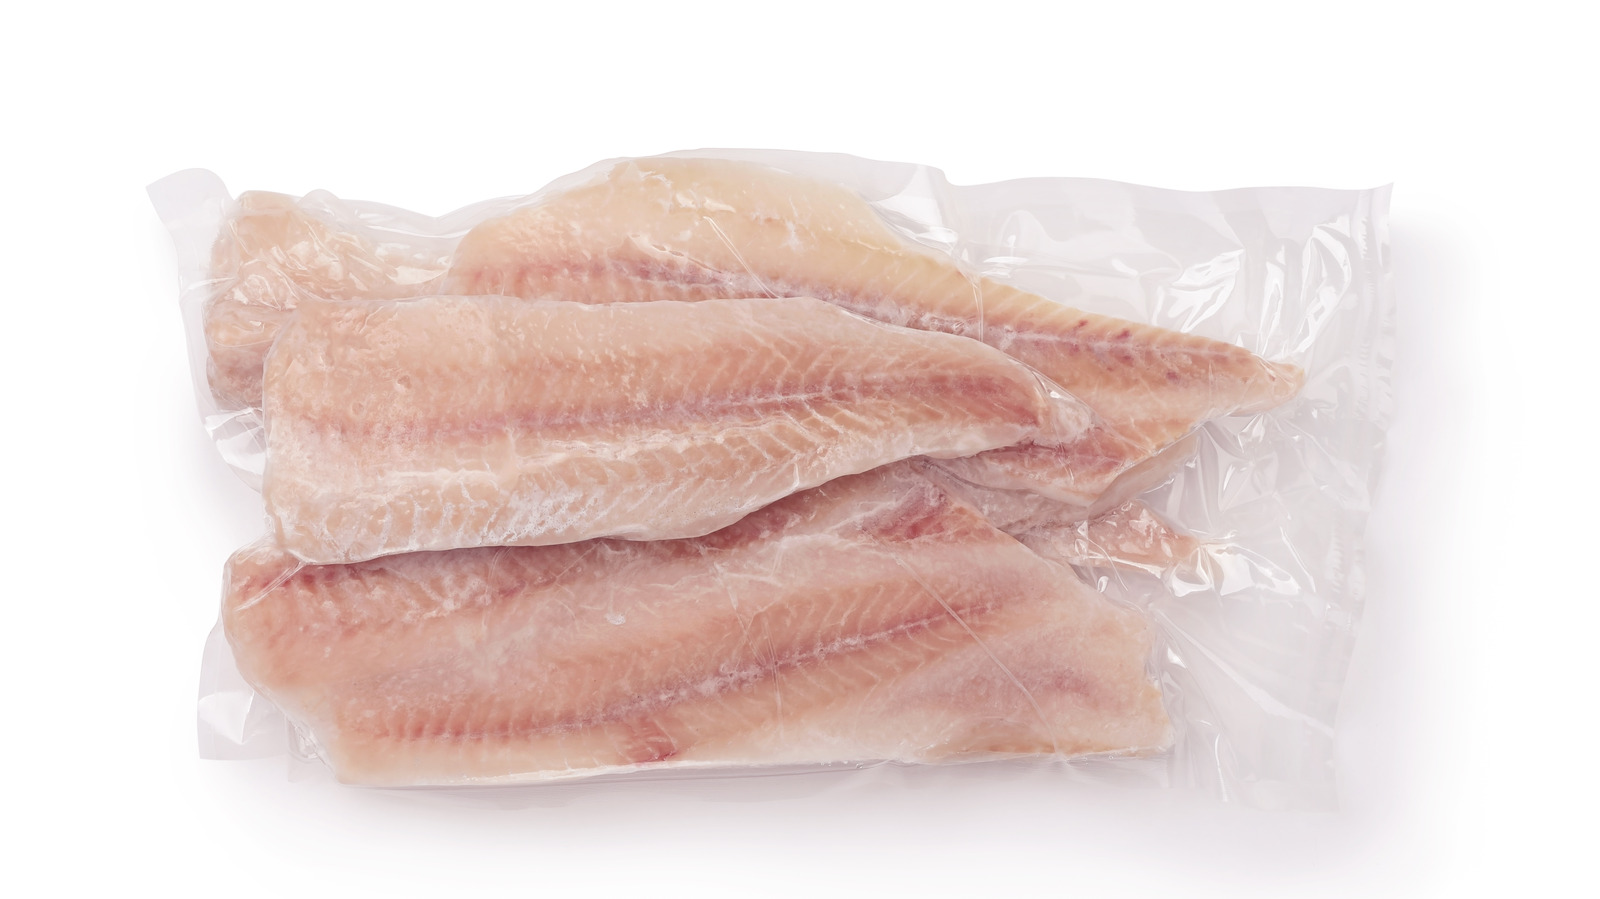 Throw Your Packaged Frozen Fish Away Immediately If You ...